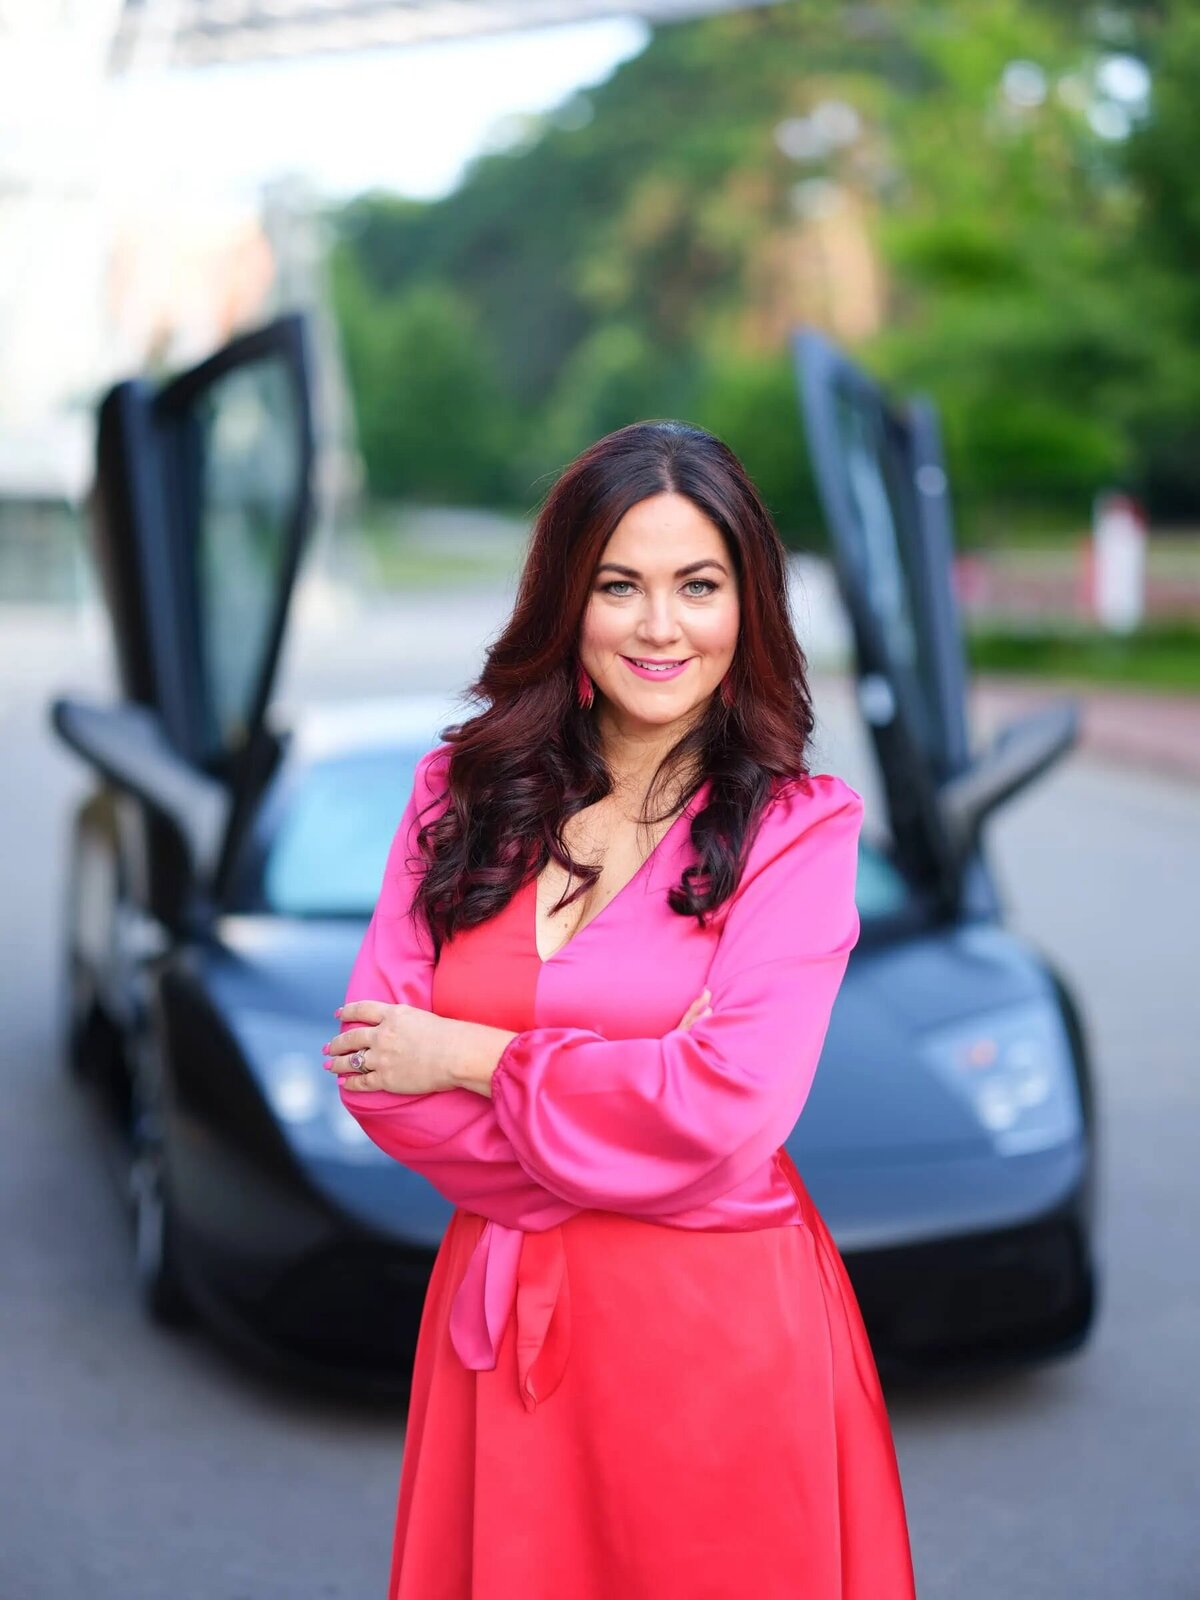 A woman standing in front of a sports car with its doors open